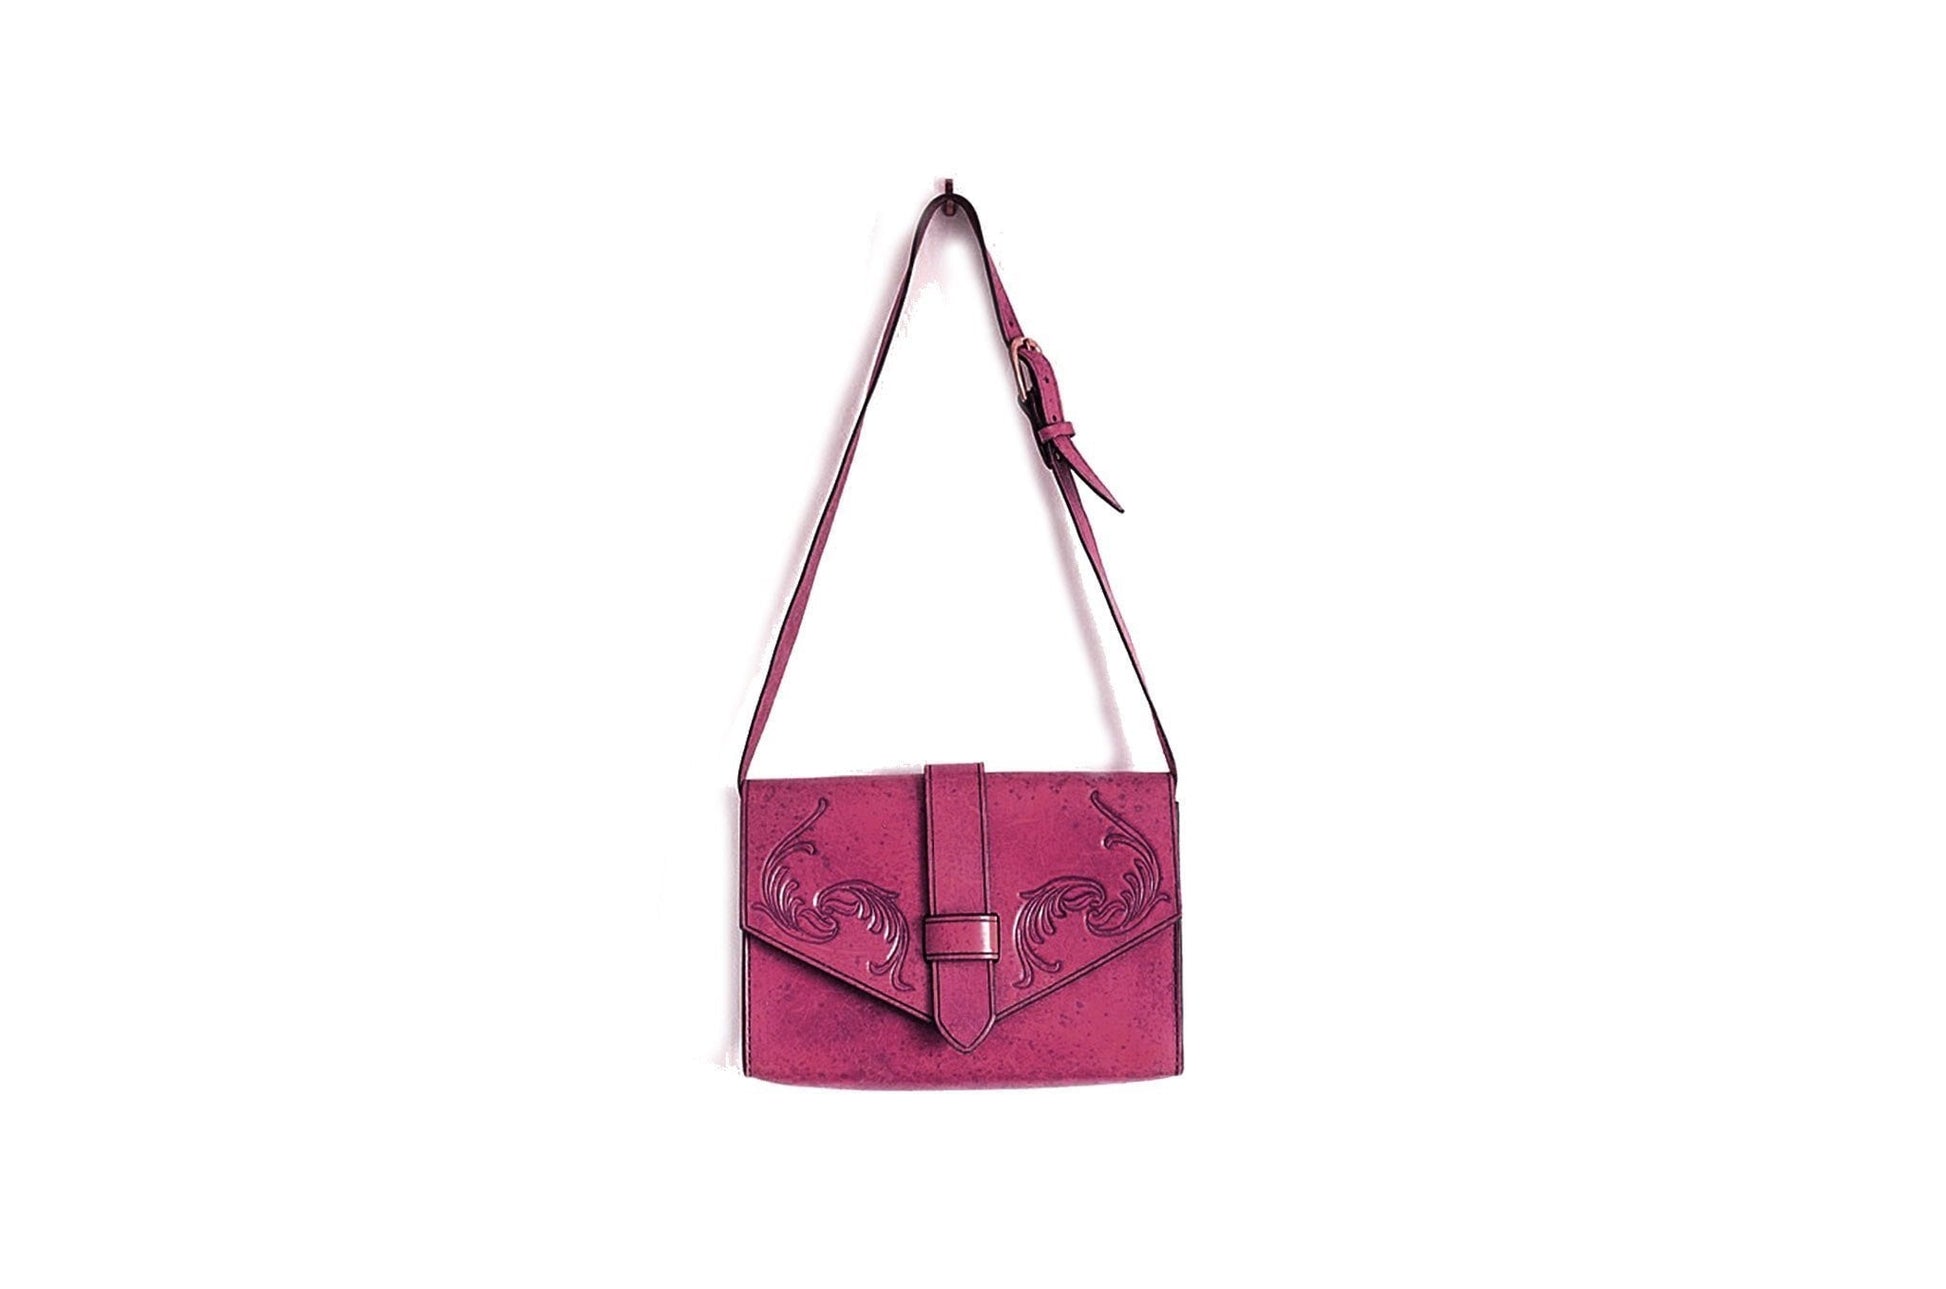 Artisanal Bags Medium Violet Red Leather Foldover Bag - Multiple Colors A799447